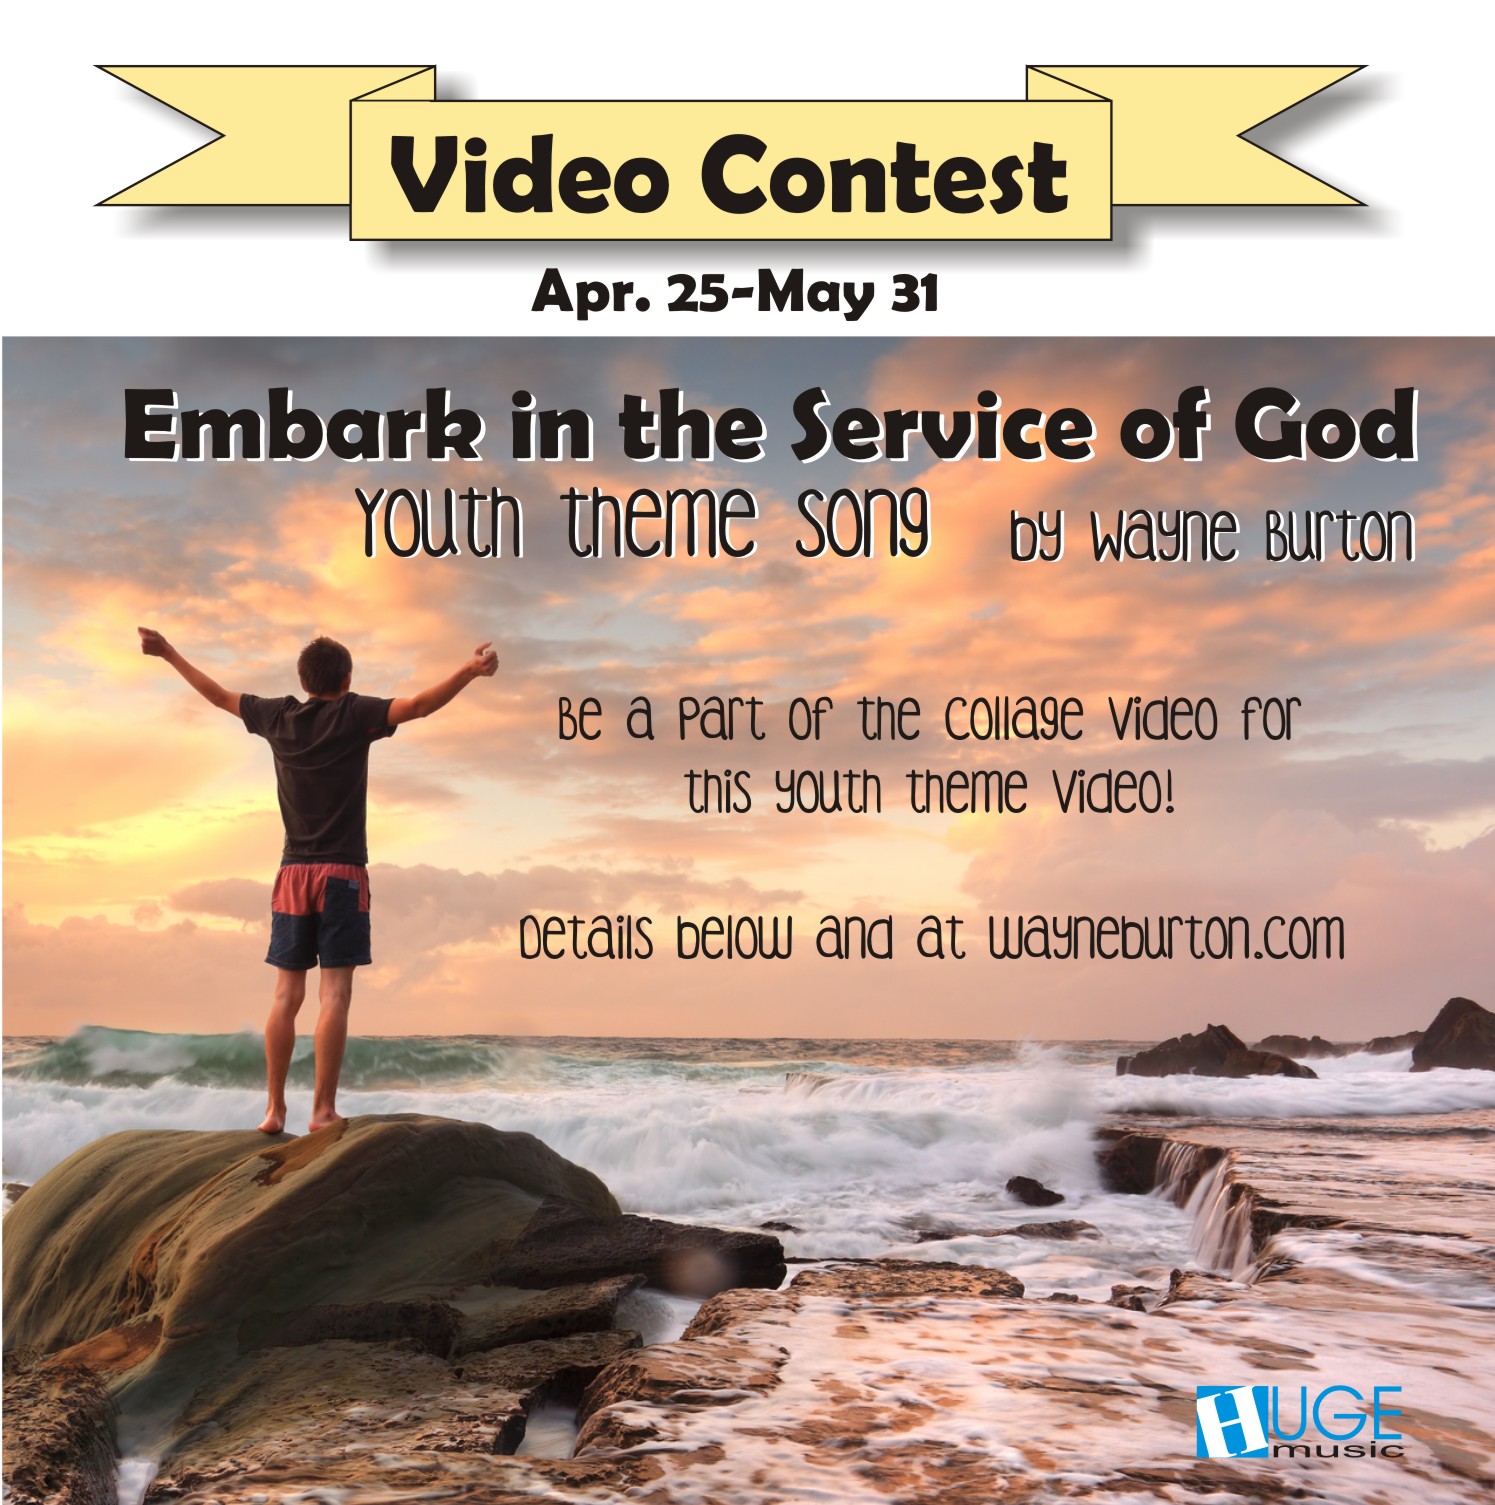 VIDEO CONTEST – Embark in the Service of God